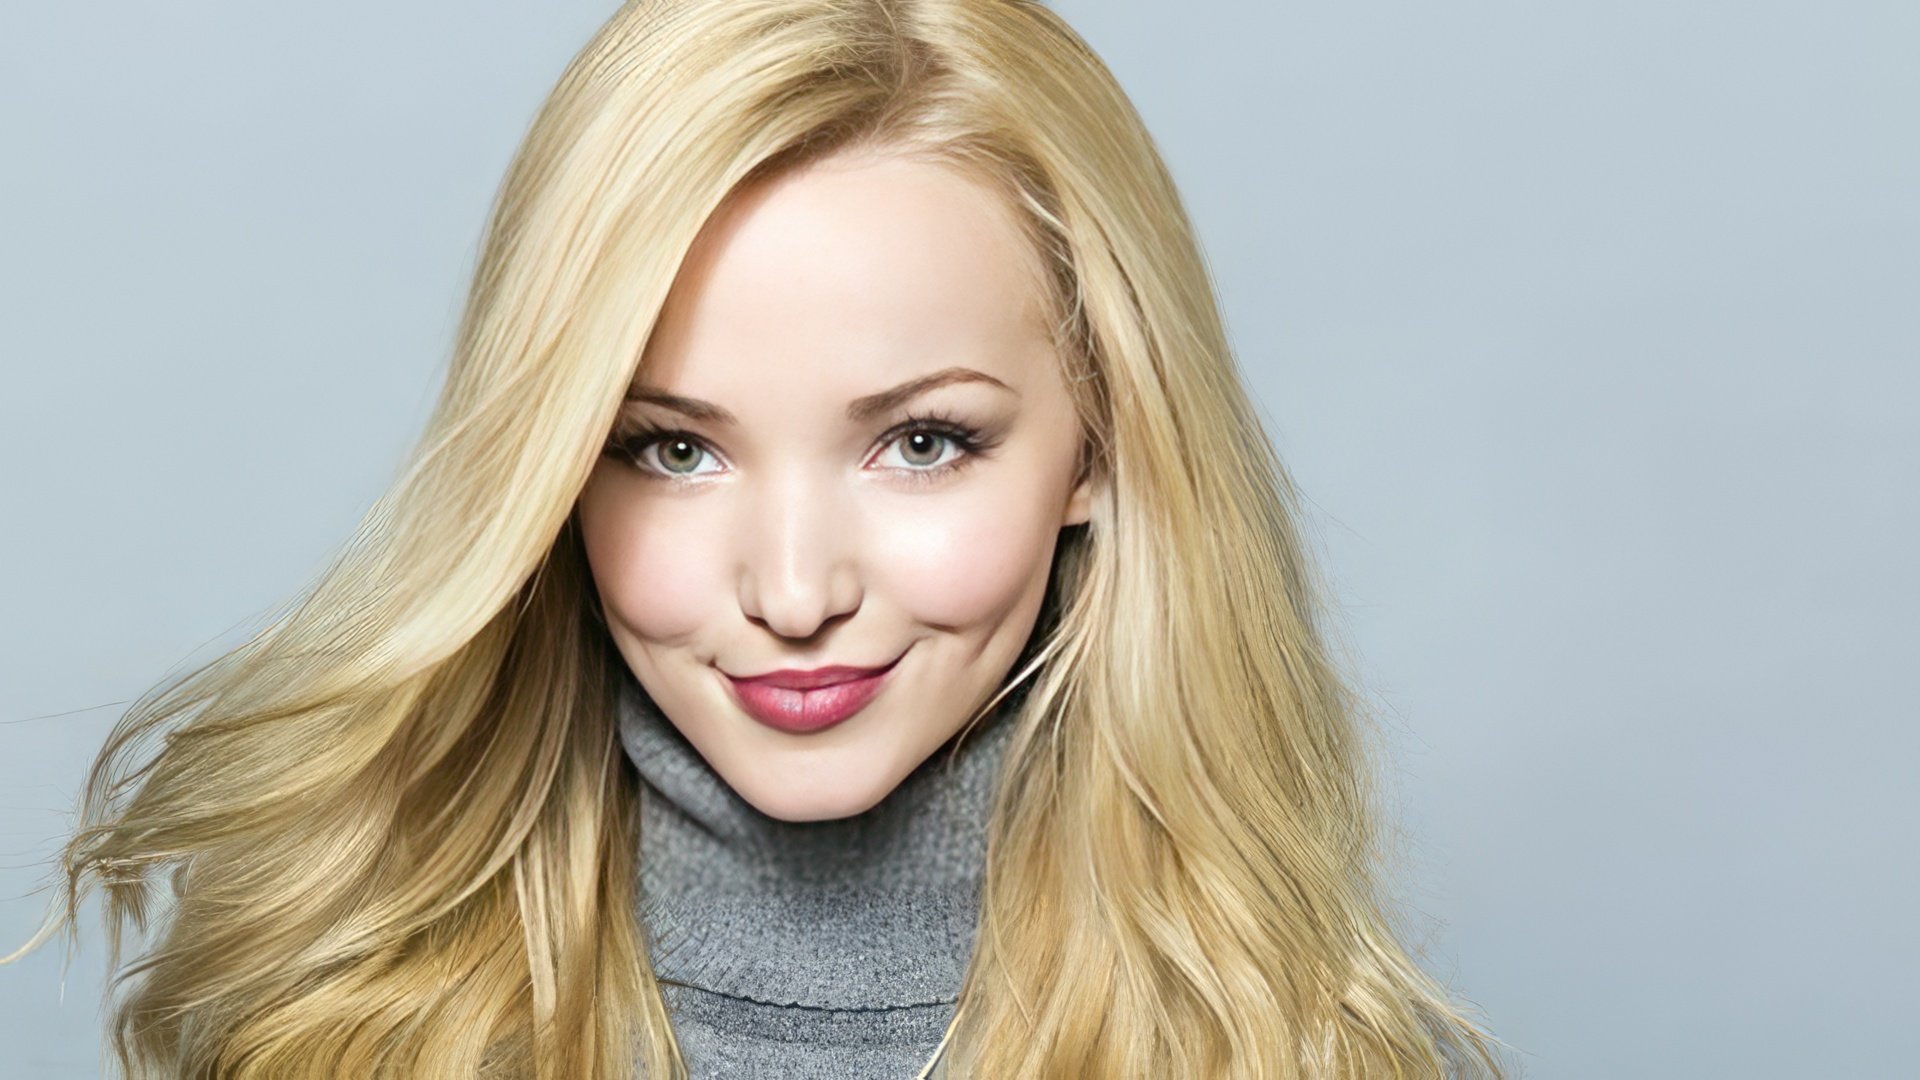 American actress and singer Dove Cameron